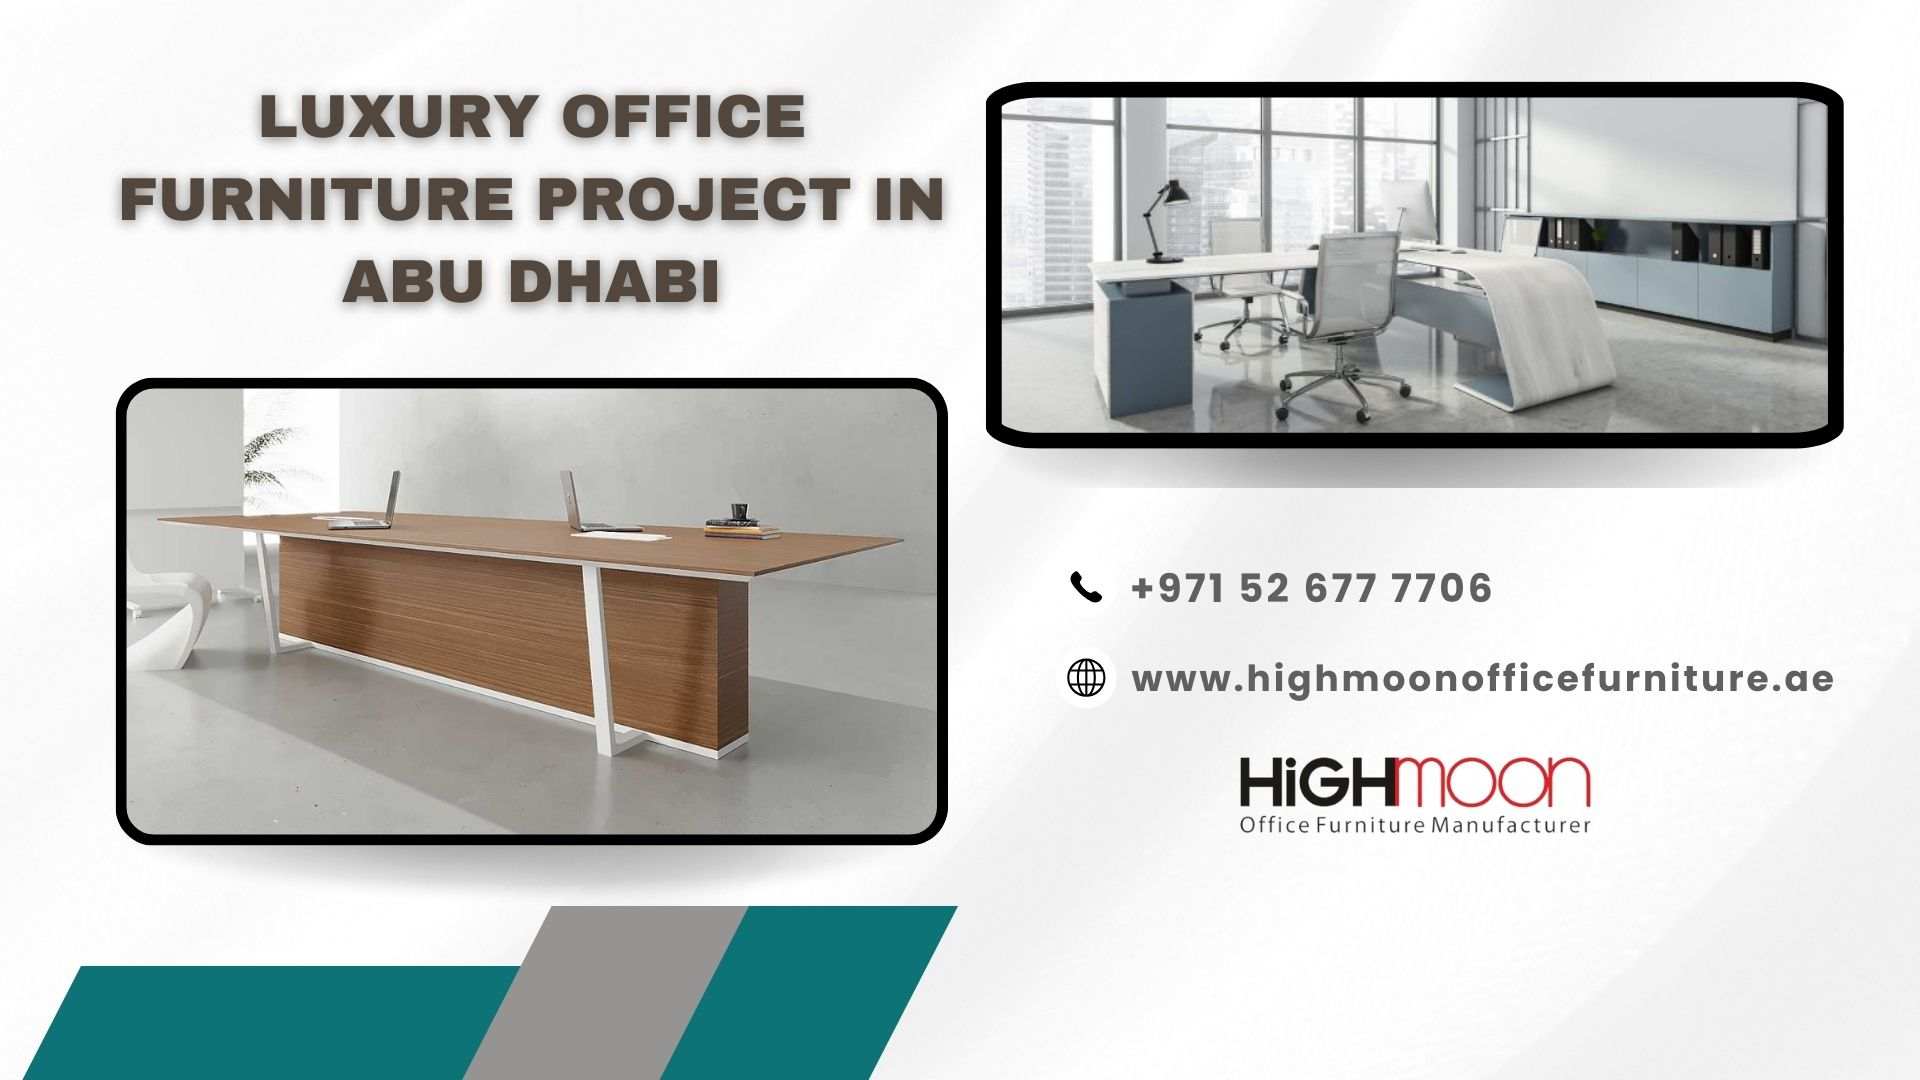 Luxury Office Furniture Project in Abu Dhabi